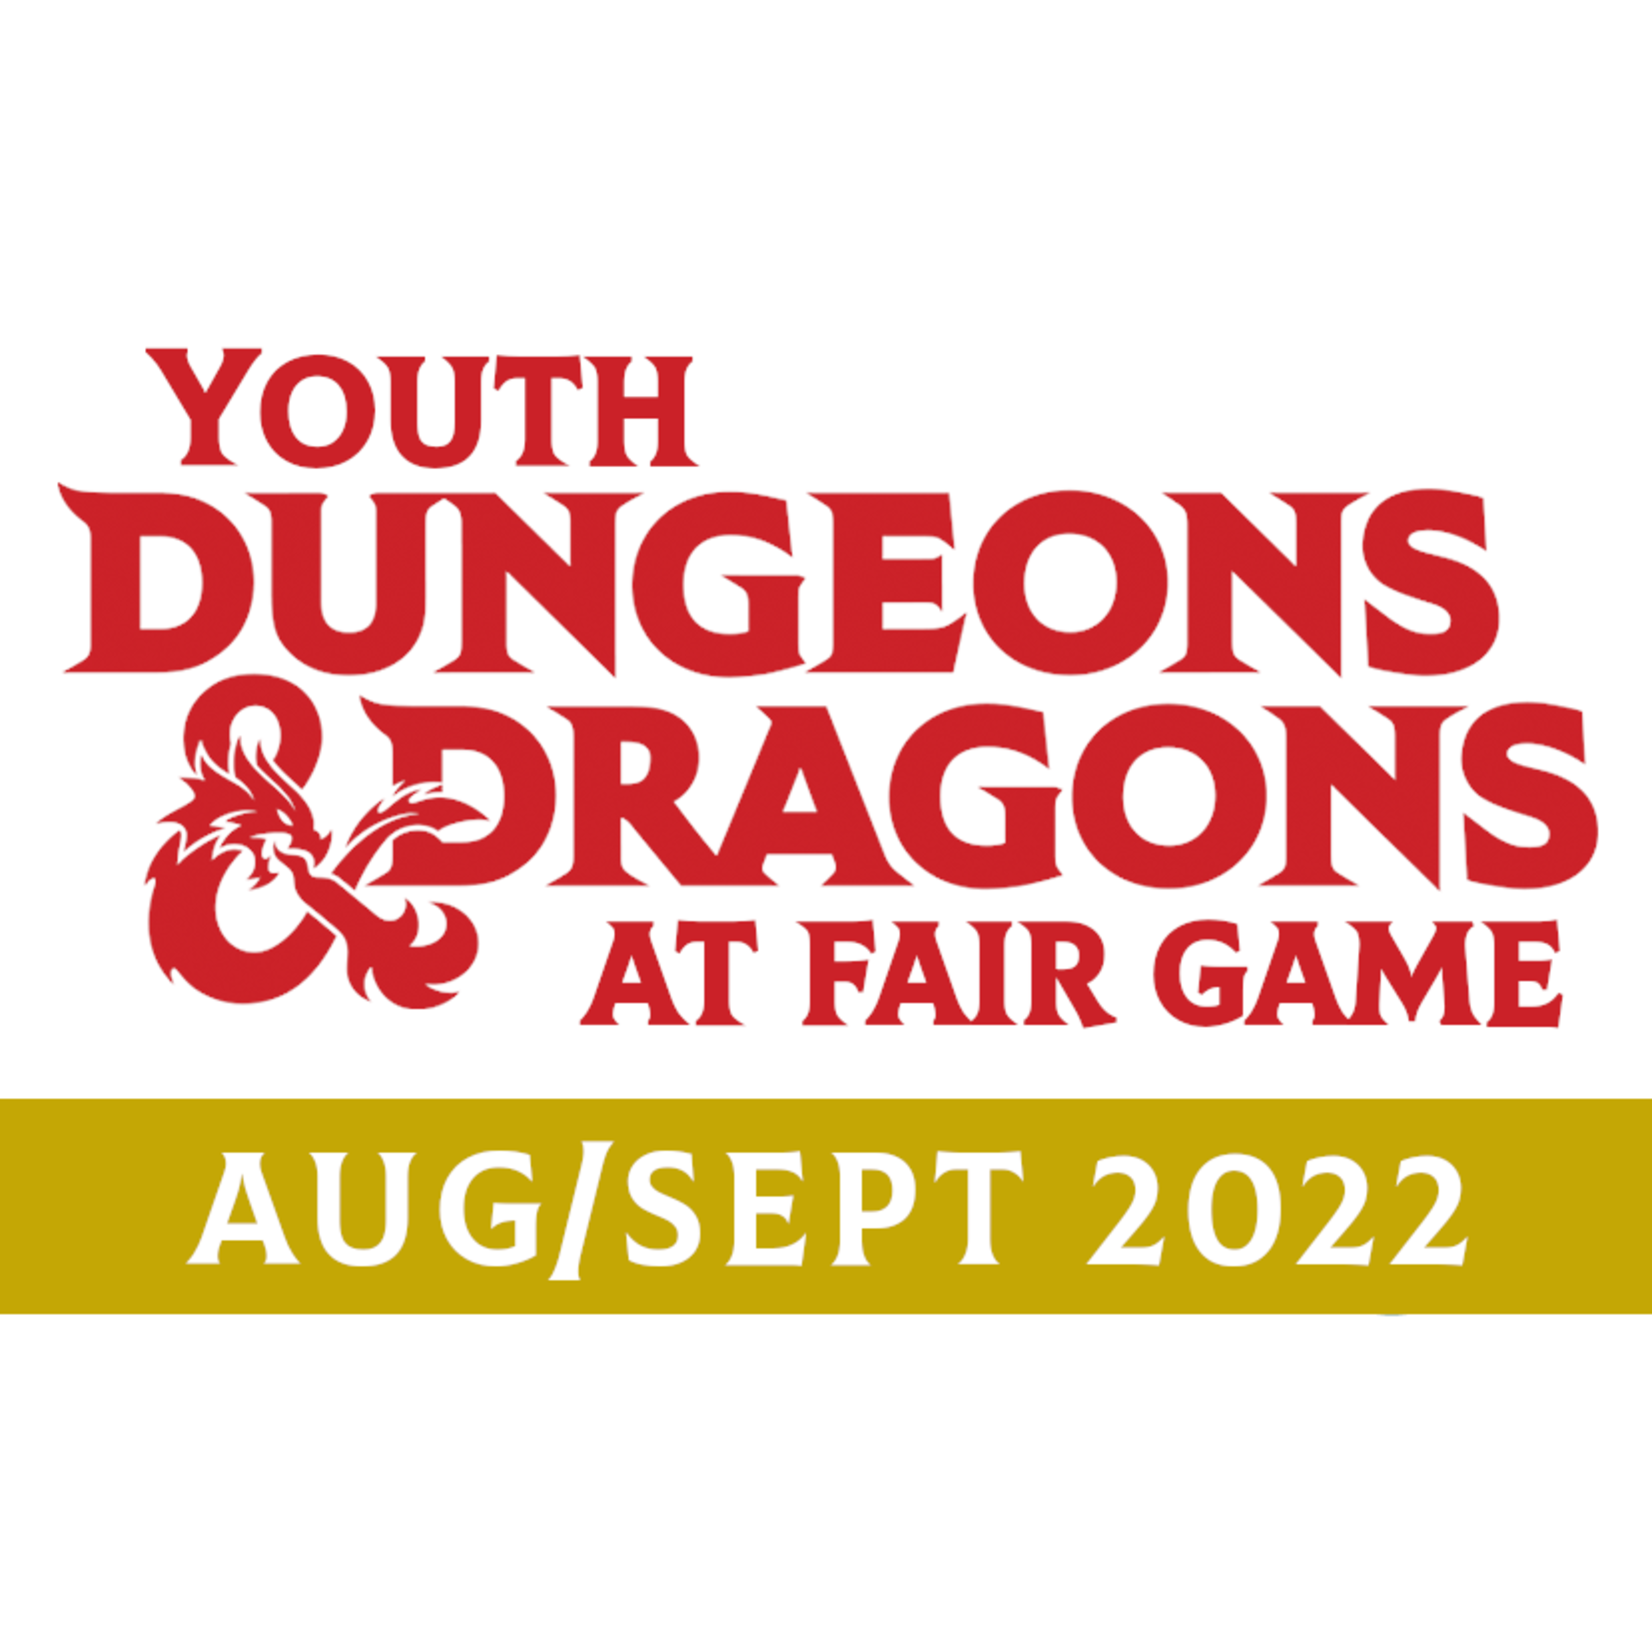 Fair Game YDND Aug/Sept 2022: Group DC1 - Wednesday Downers Grove 4-6 PM (Ages 13-17)